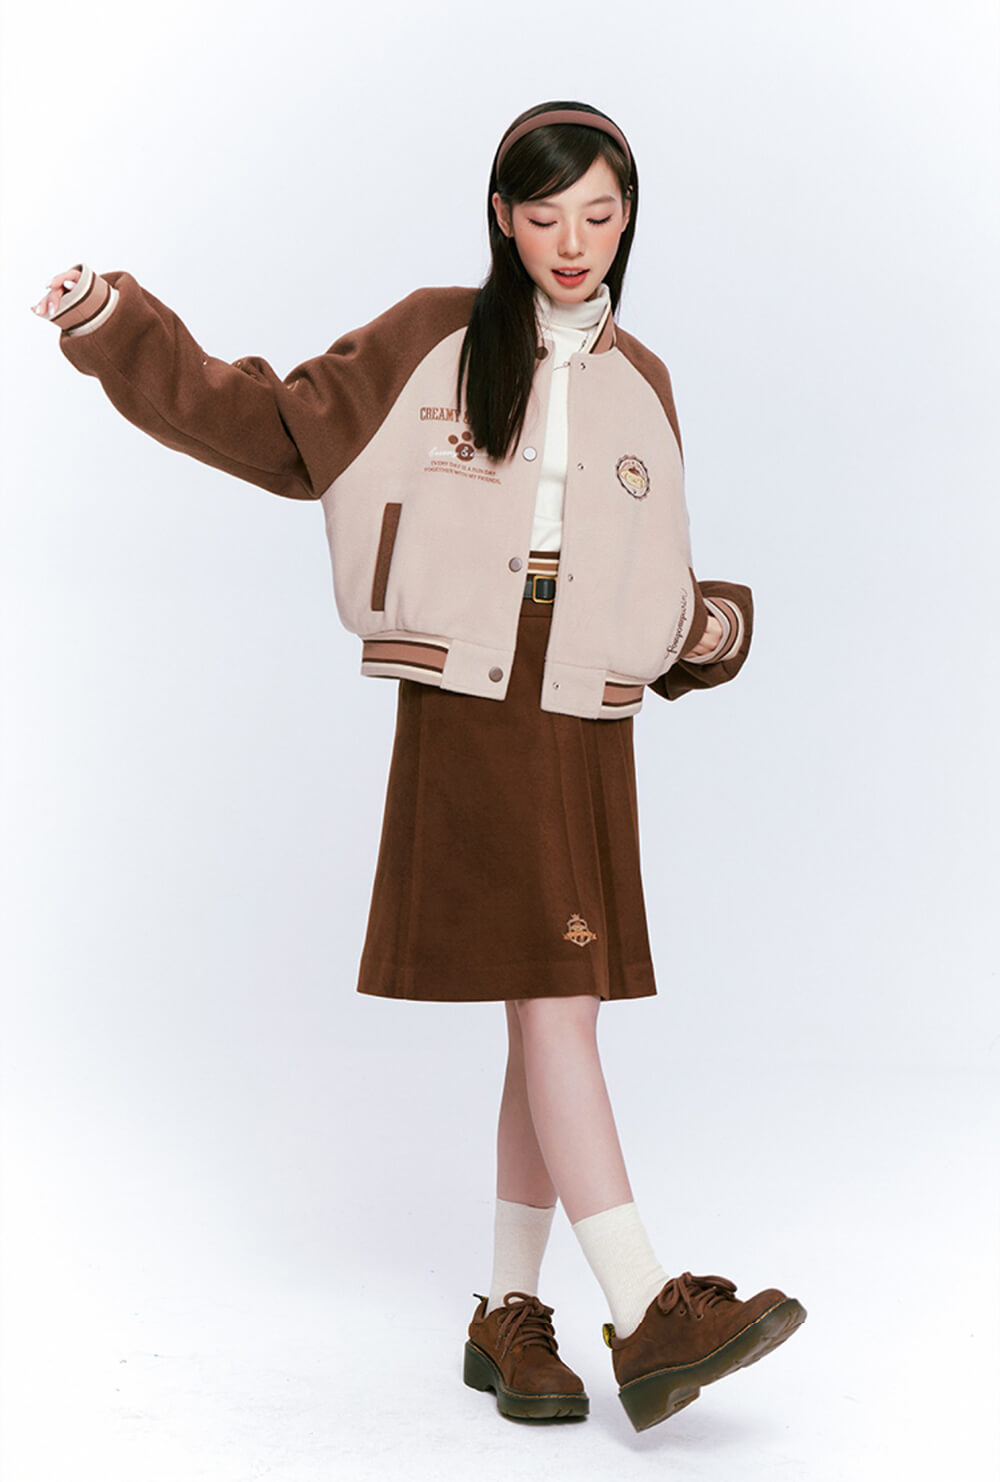 sanrio-pompompurin-brown-outfit-styled-by-colorblock-varsity-jacket-and-pleated-skirt